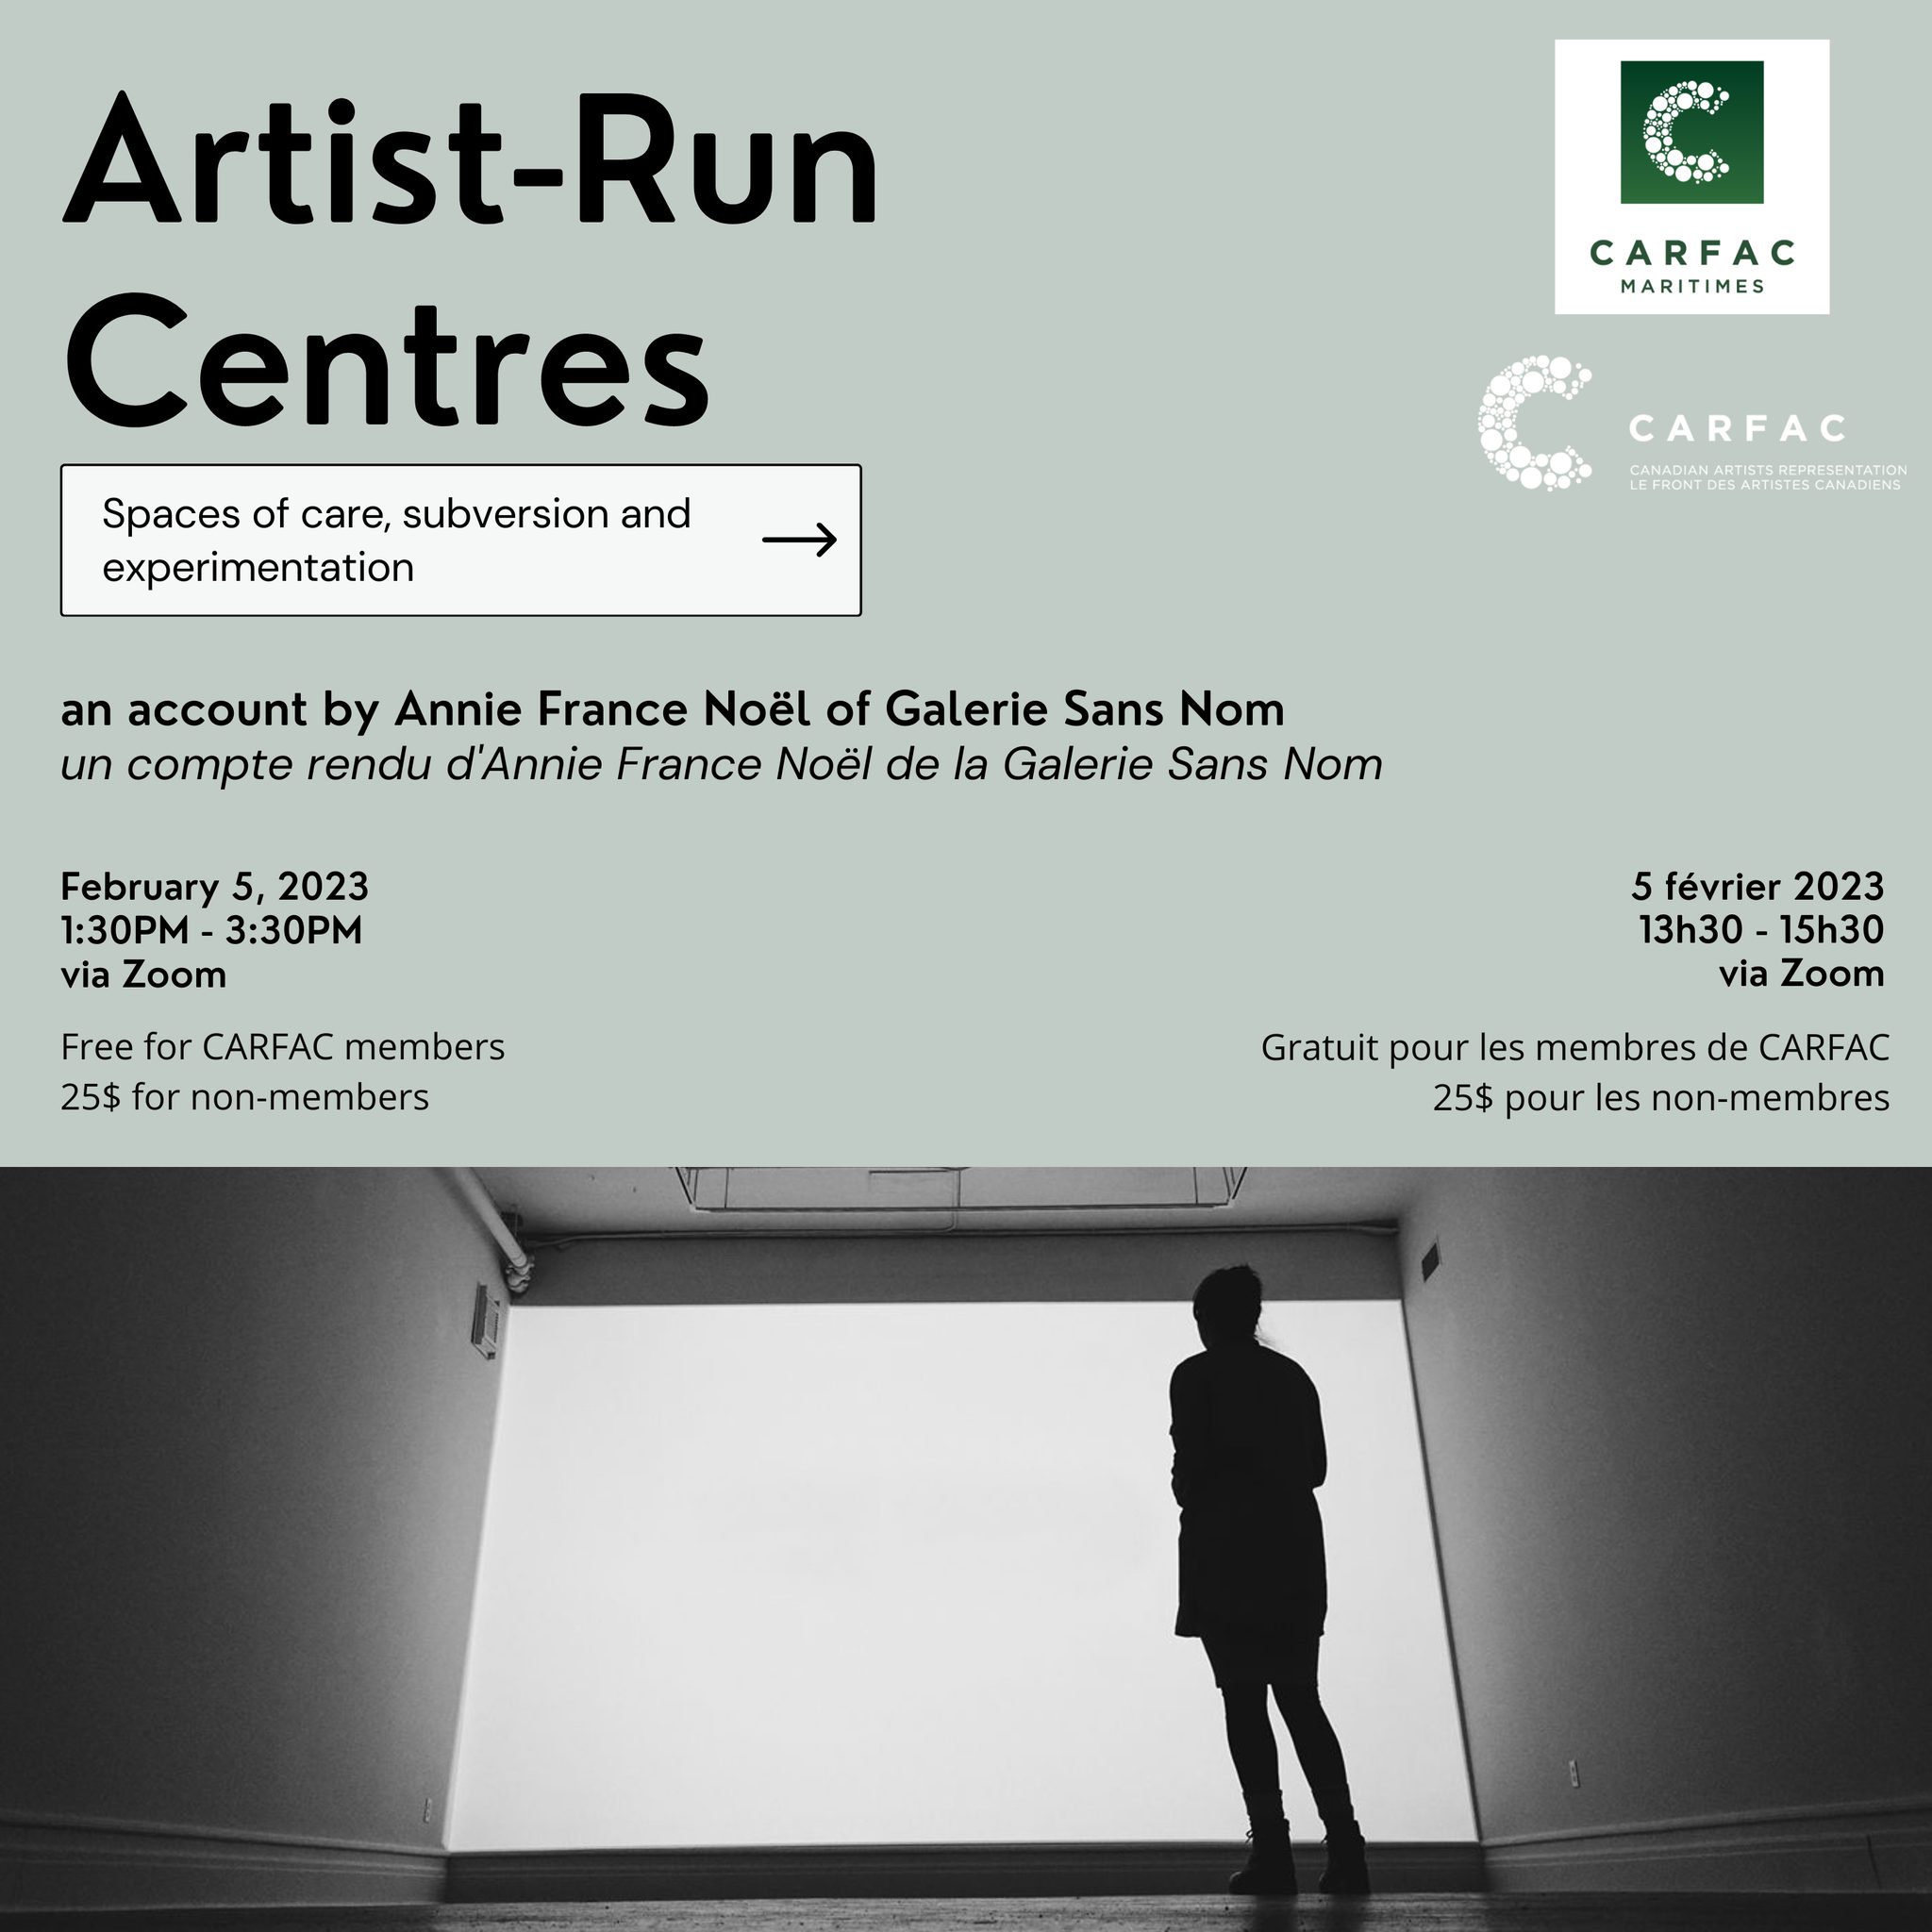 Artist-Run Centres: Spaces of care, subversion, and experimentation. An account by Annie France Noël of Galerie Sans Nom.